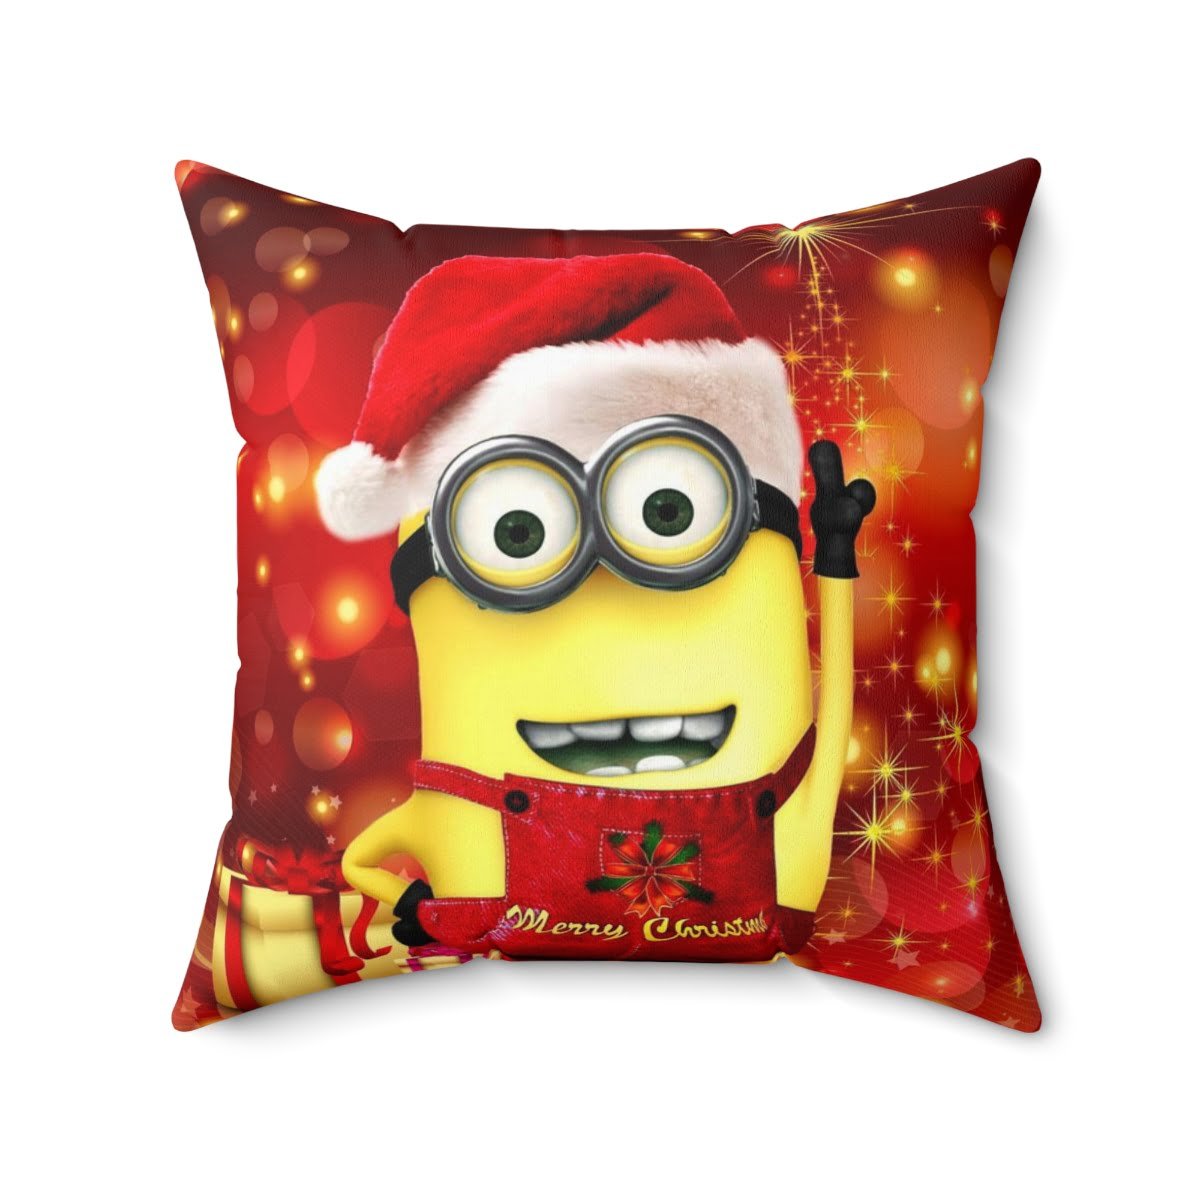 - Minions Xmas Pillow - Spun Polyester Square Pillow with Minions Merry Christmas Red Yellow - NoowAI Shop